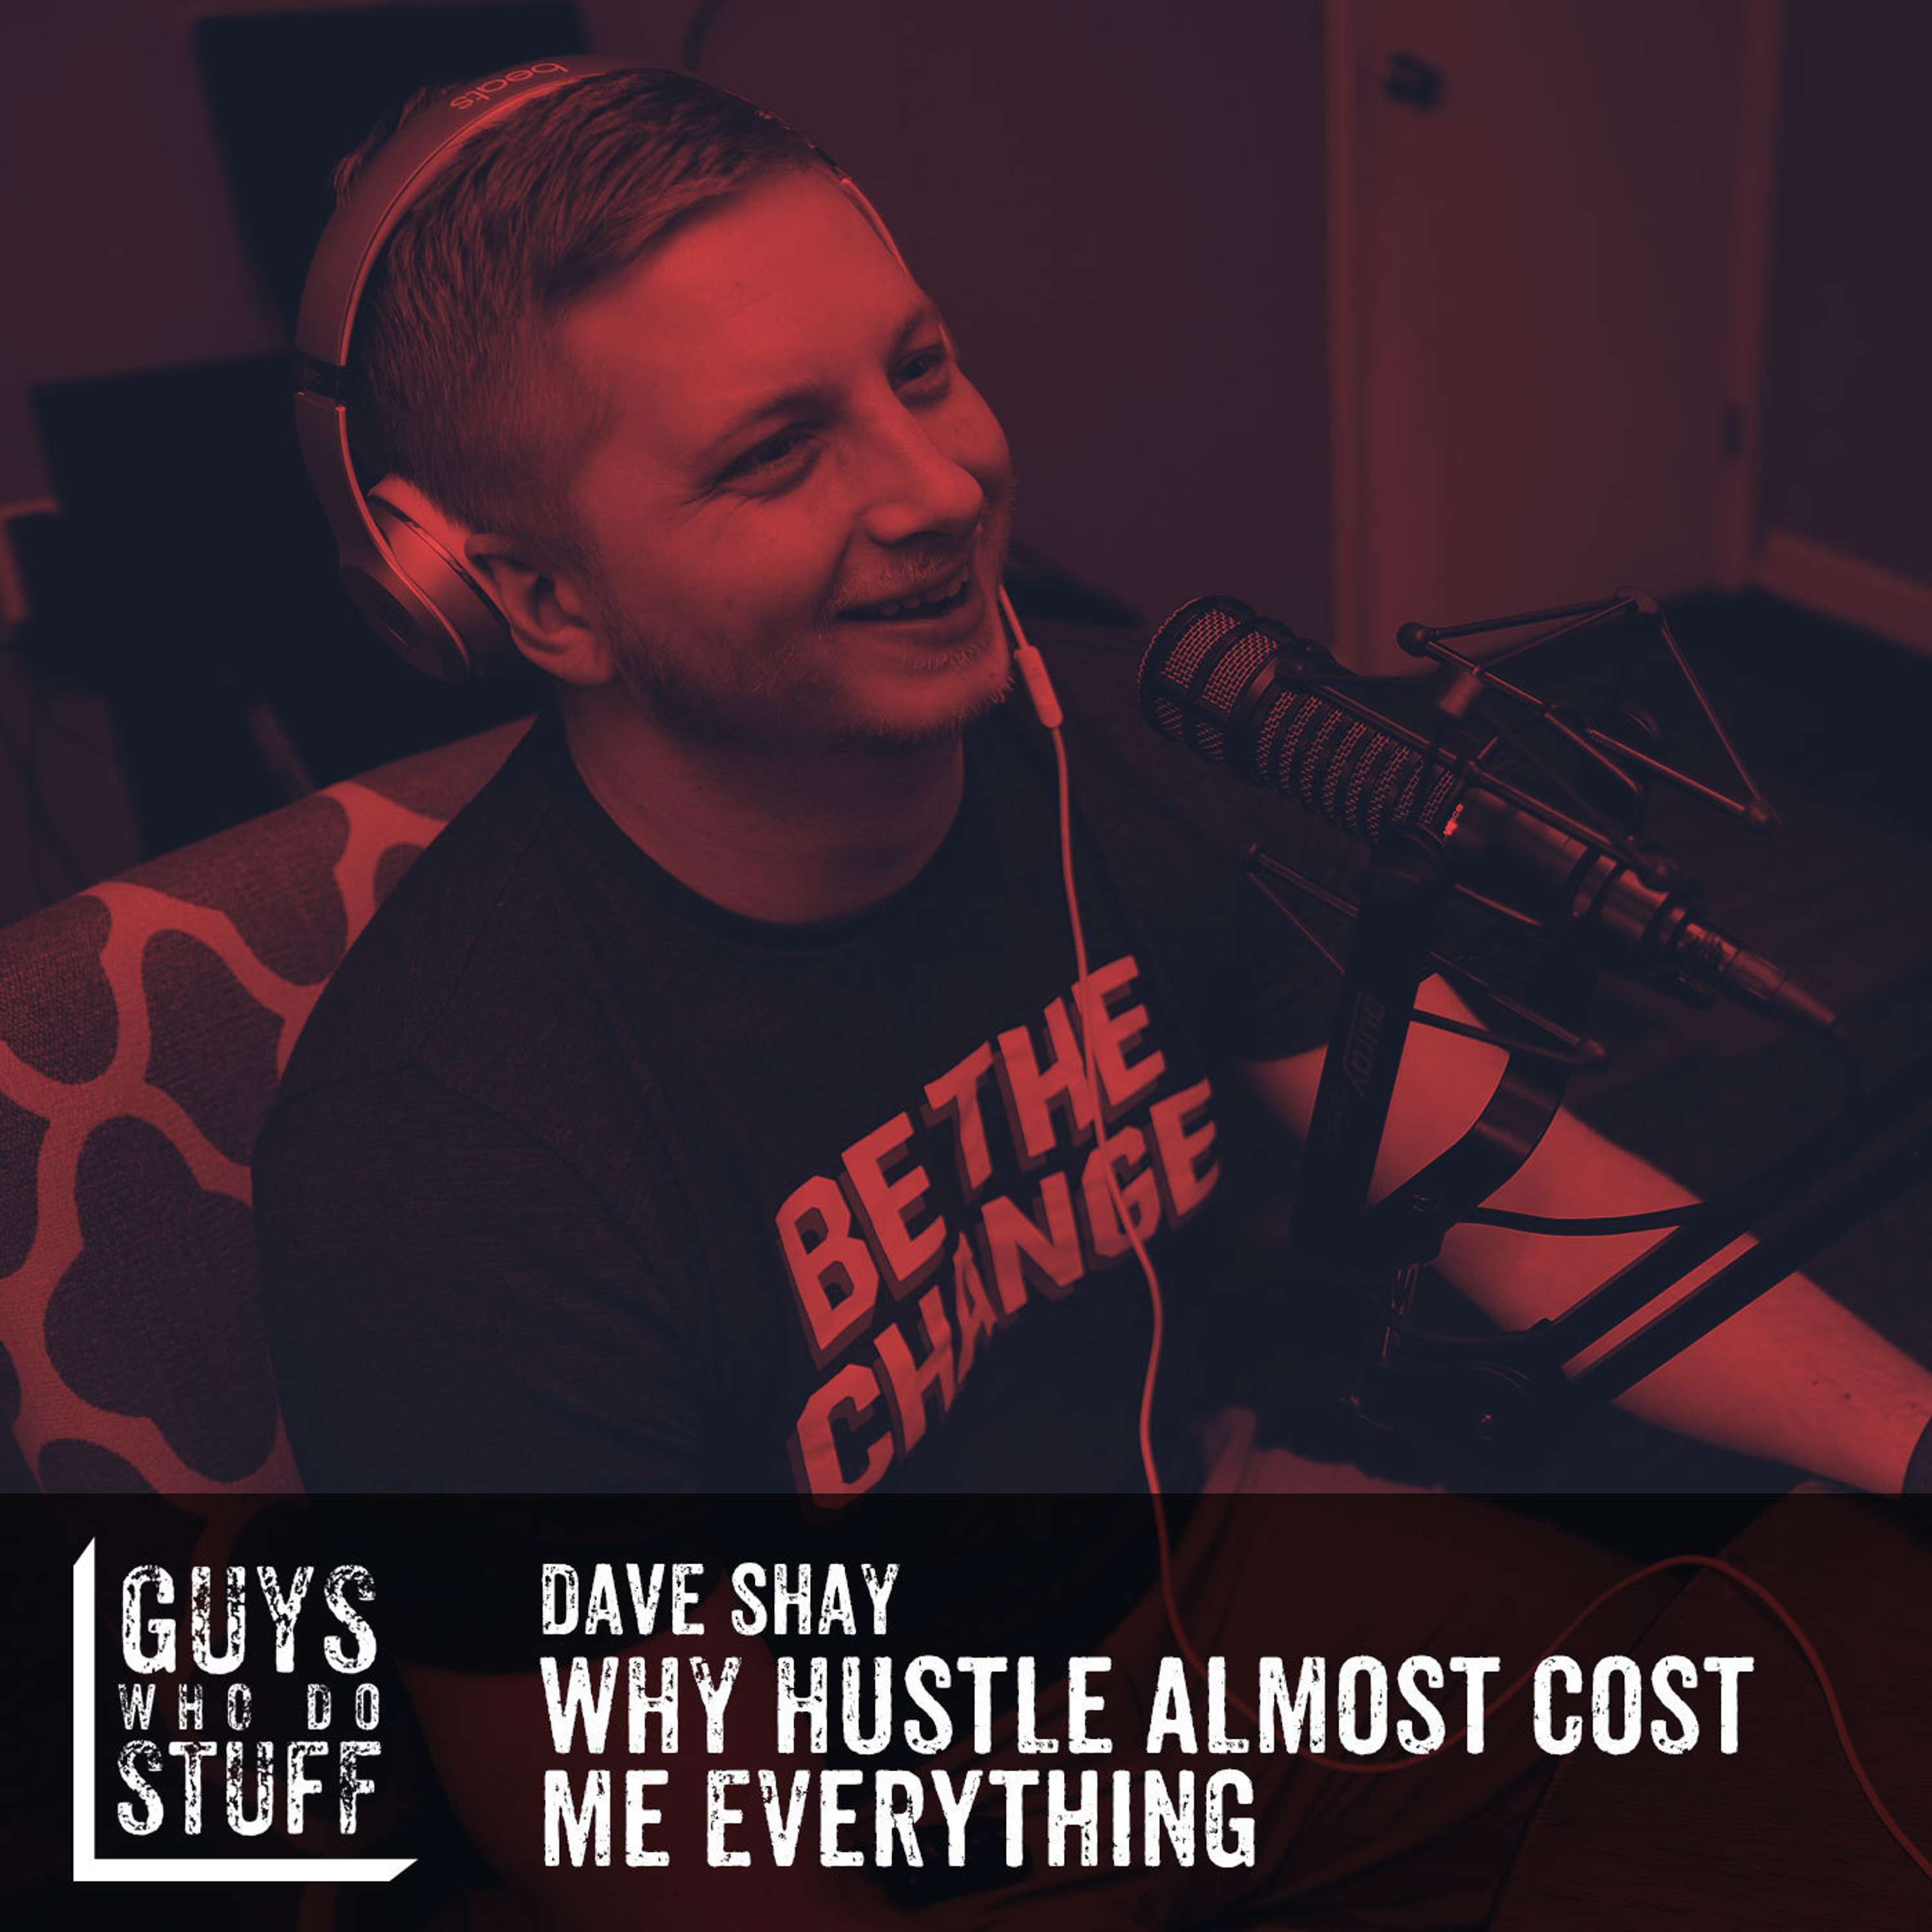 Dave Shay – Why “hustle” almost cost me everything